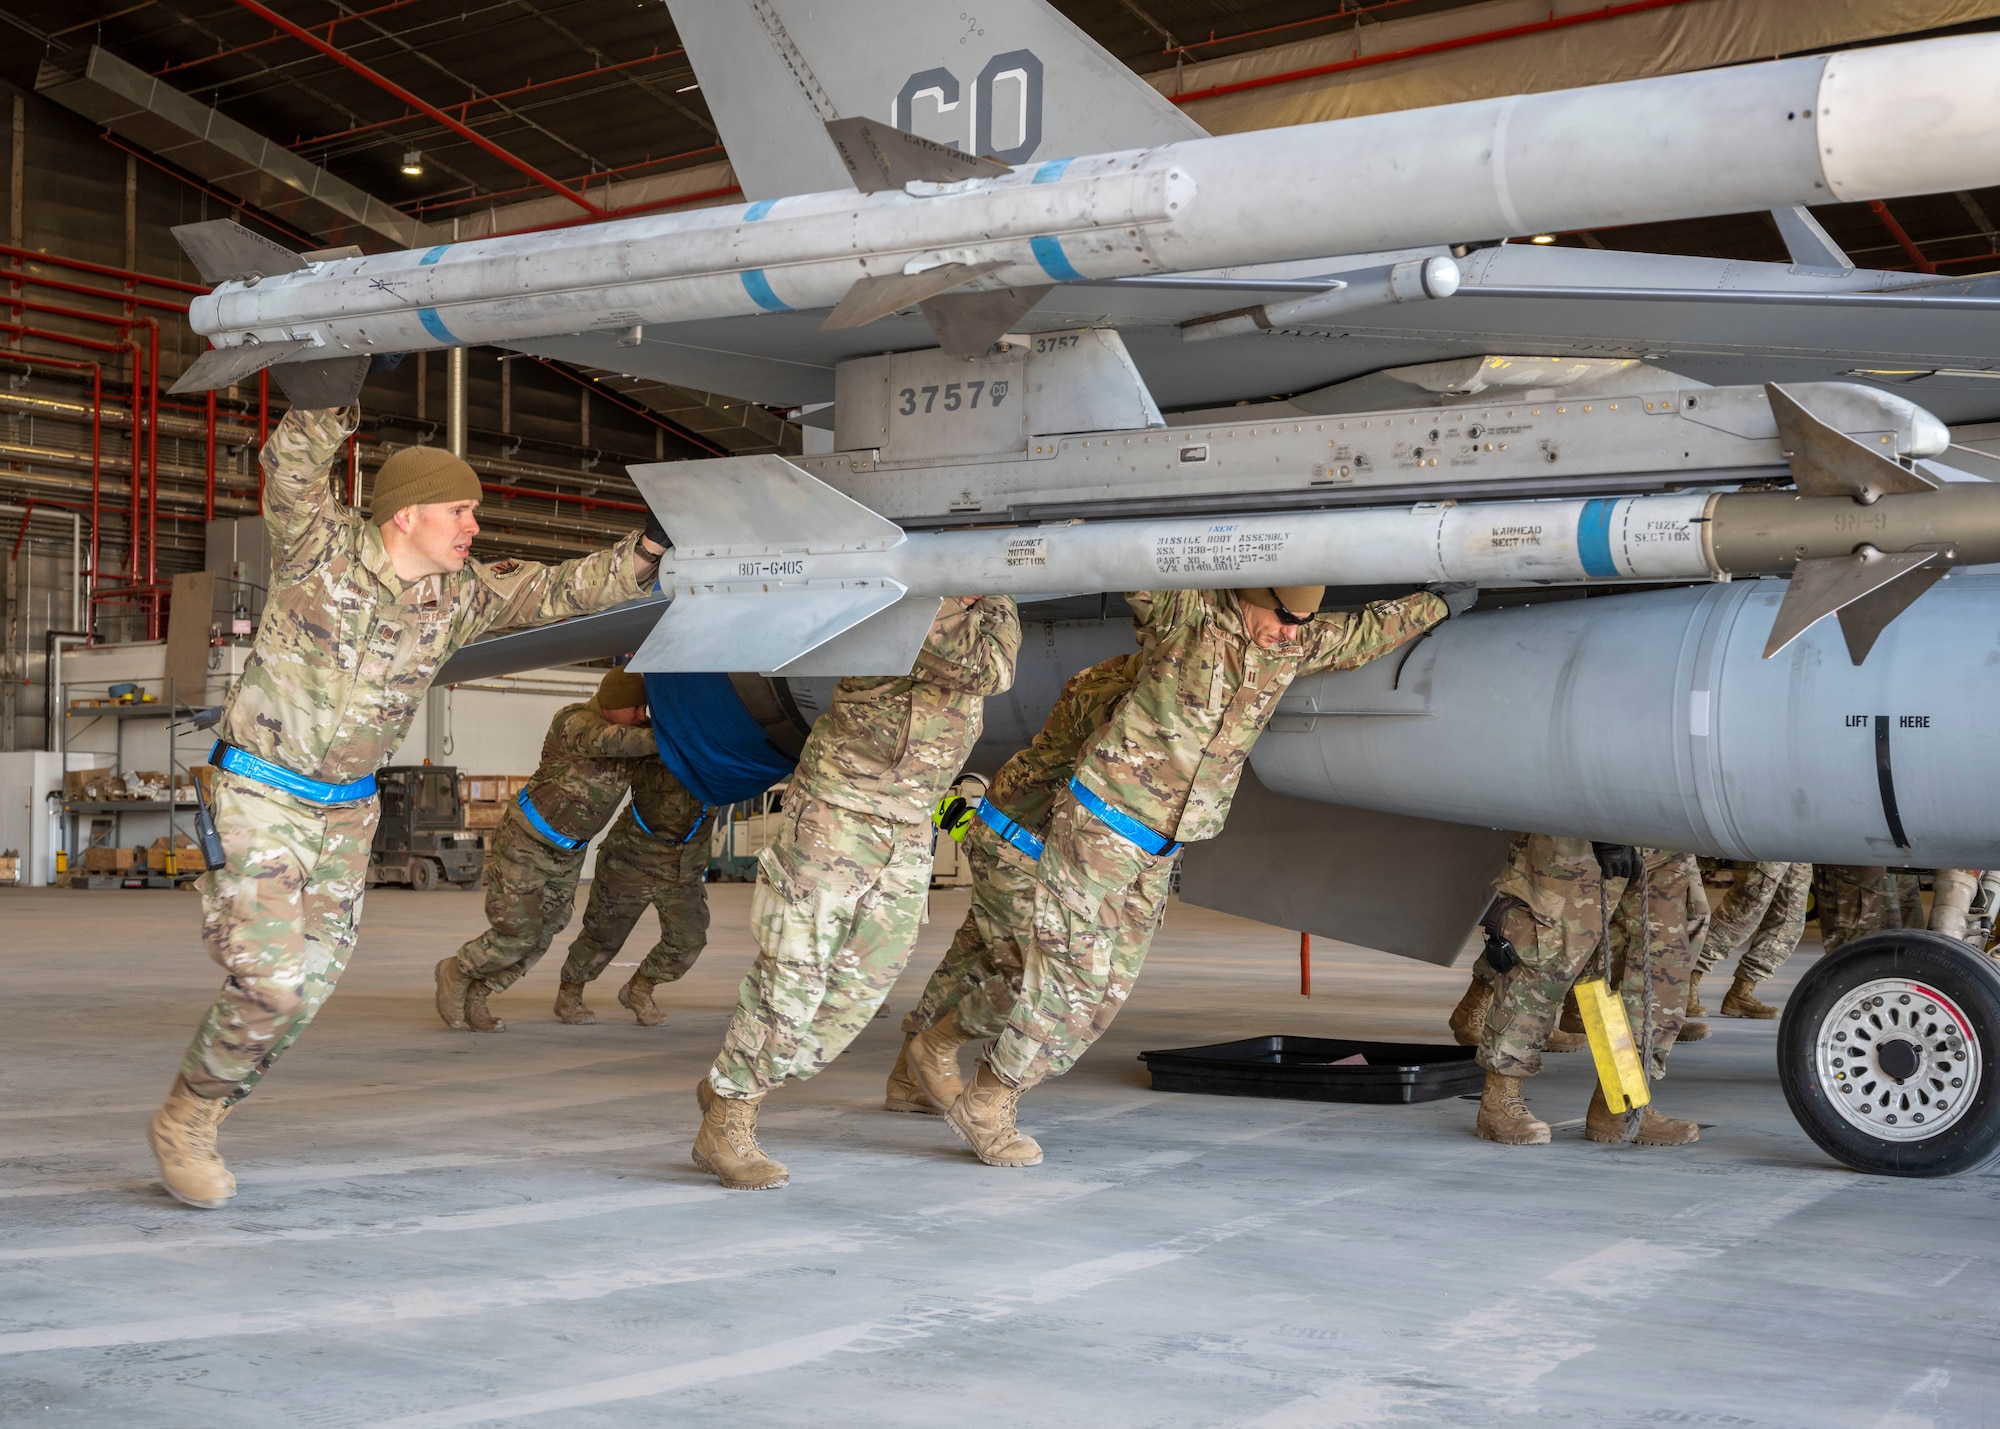 U.S. Air Force Airmen assigned to the 140th Wing, Buckley Space Force Base, Colorado, push a F-16 Fighting Falcon out from a hangar June 15, 2021 at Thule Air Base, Greenland.